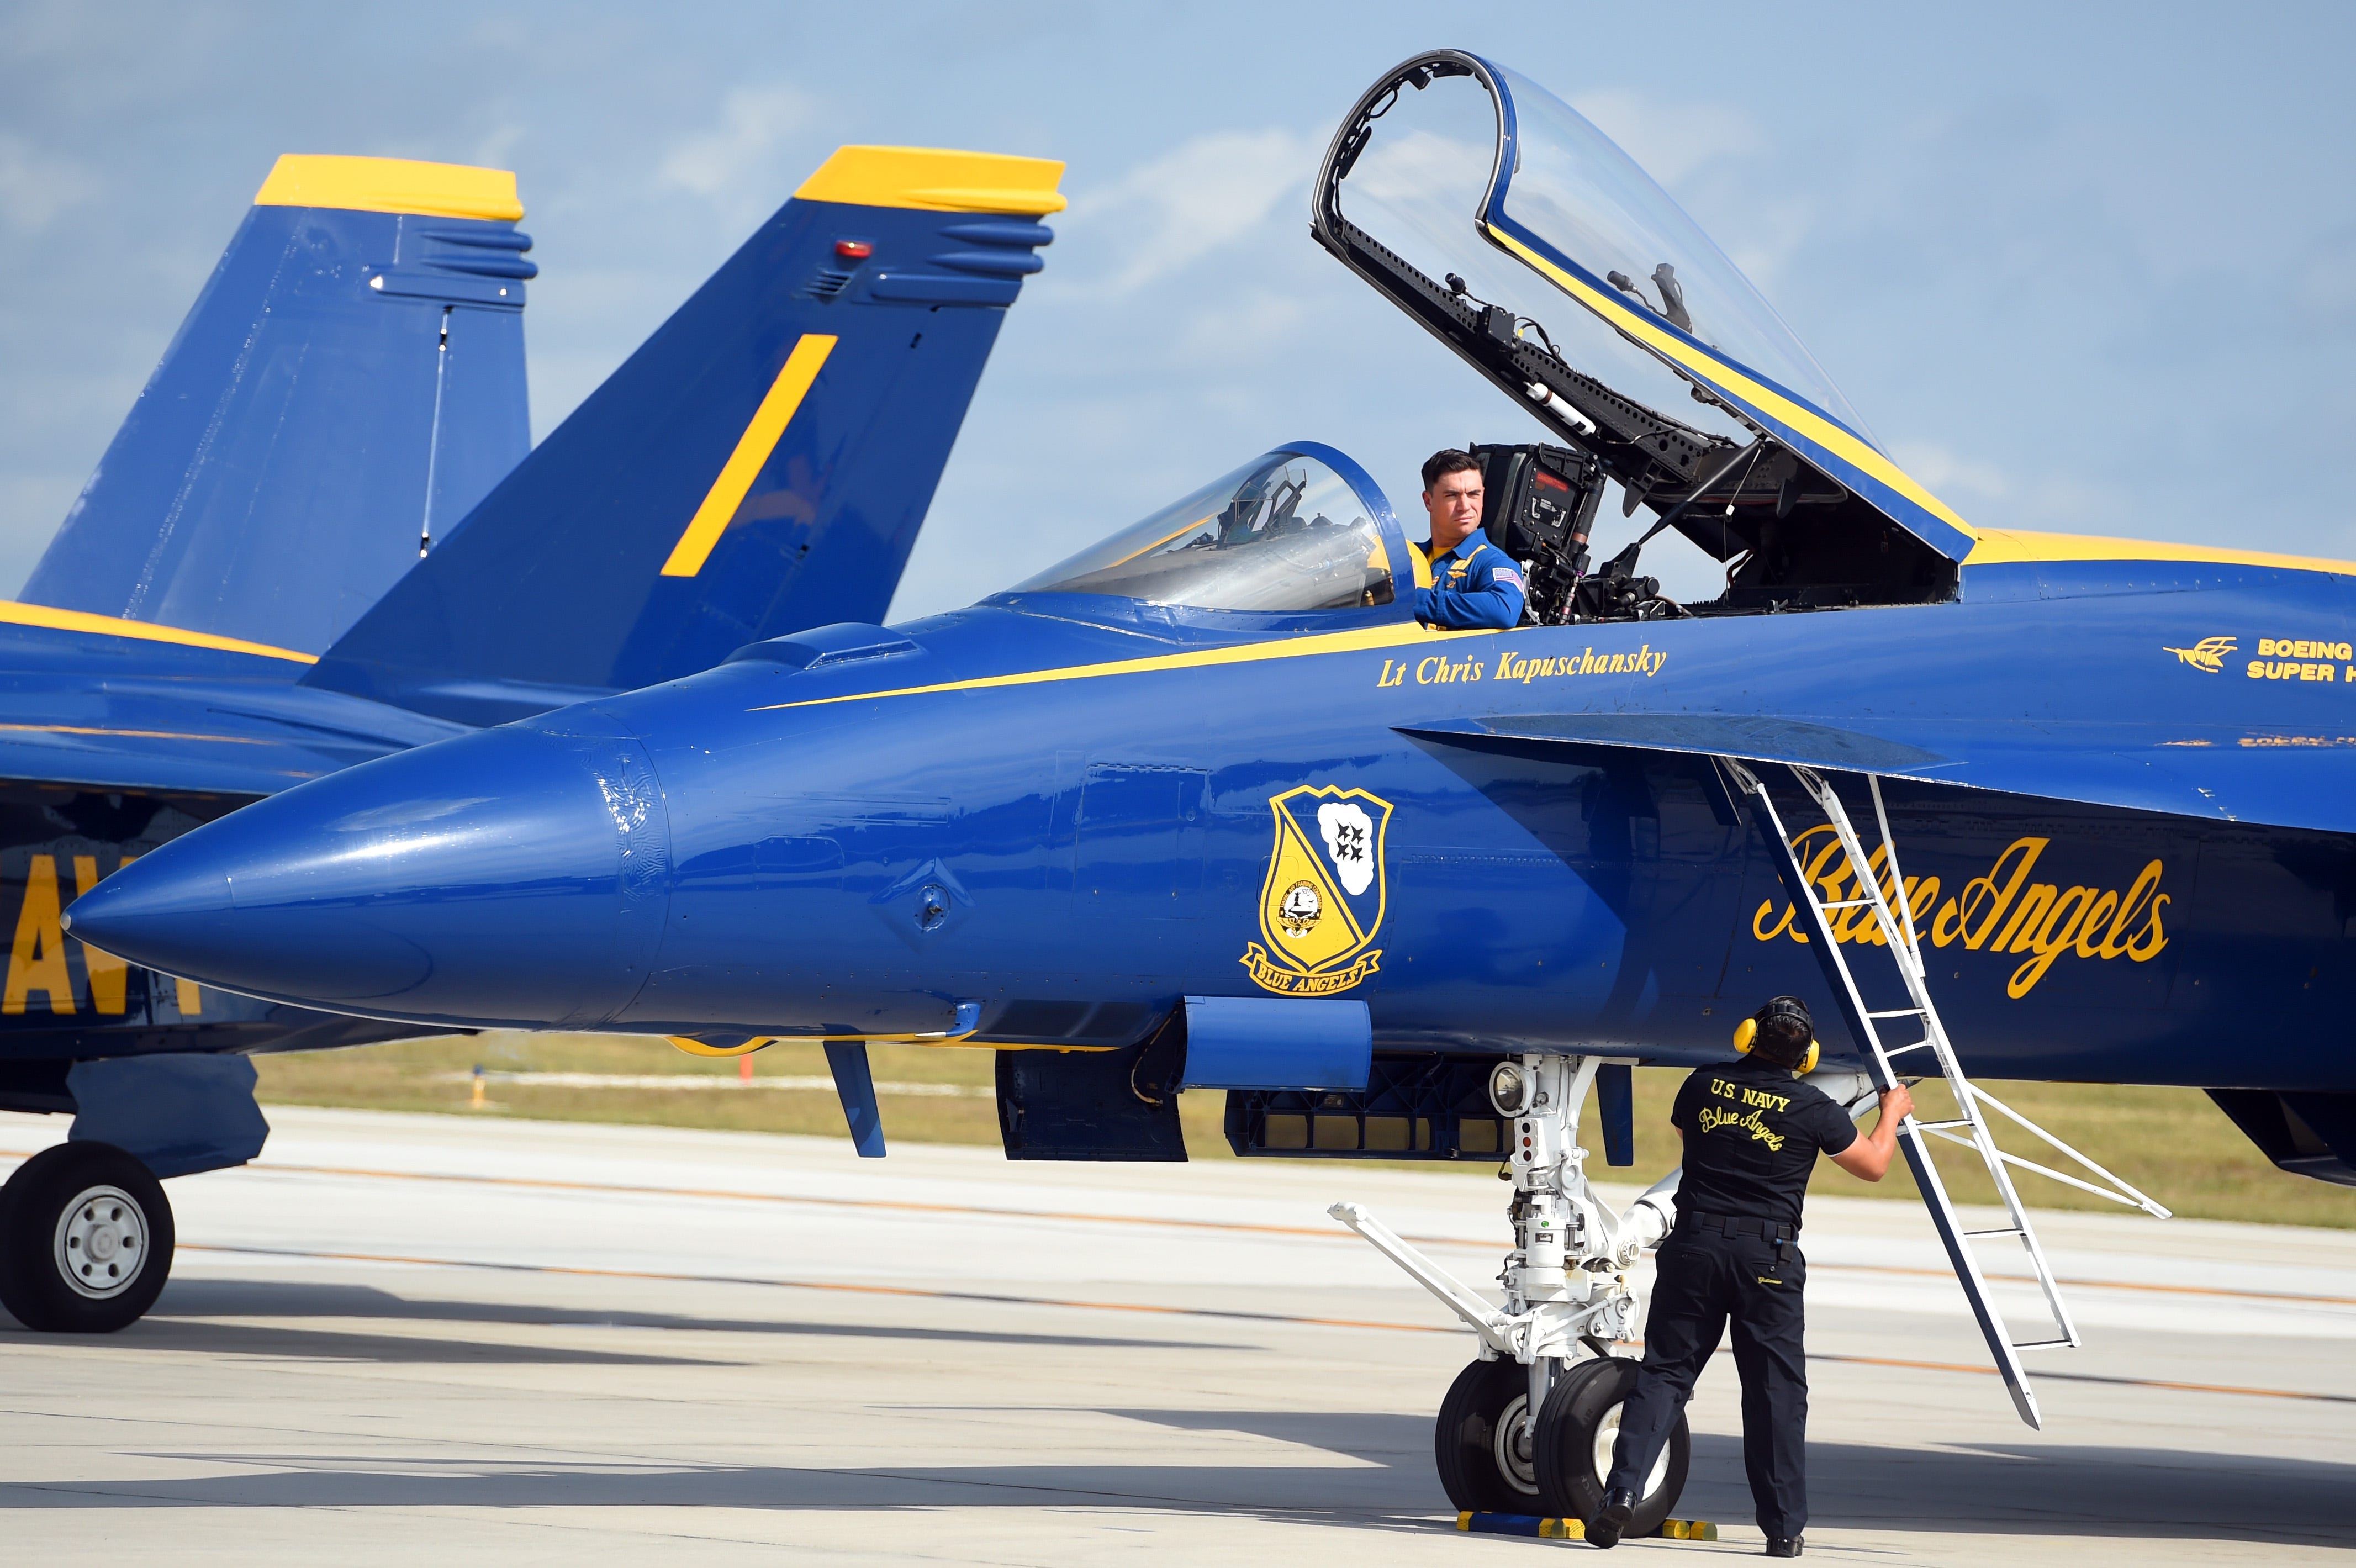 Vero Beach Air Show 2022 Pictures, video, Twitter and Instagram